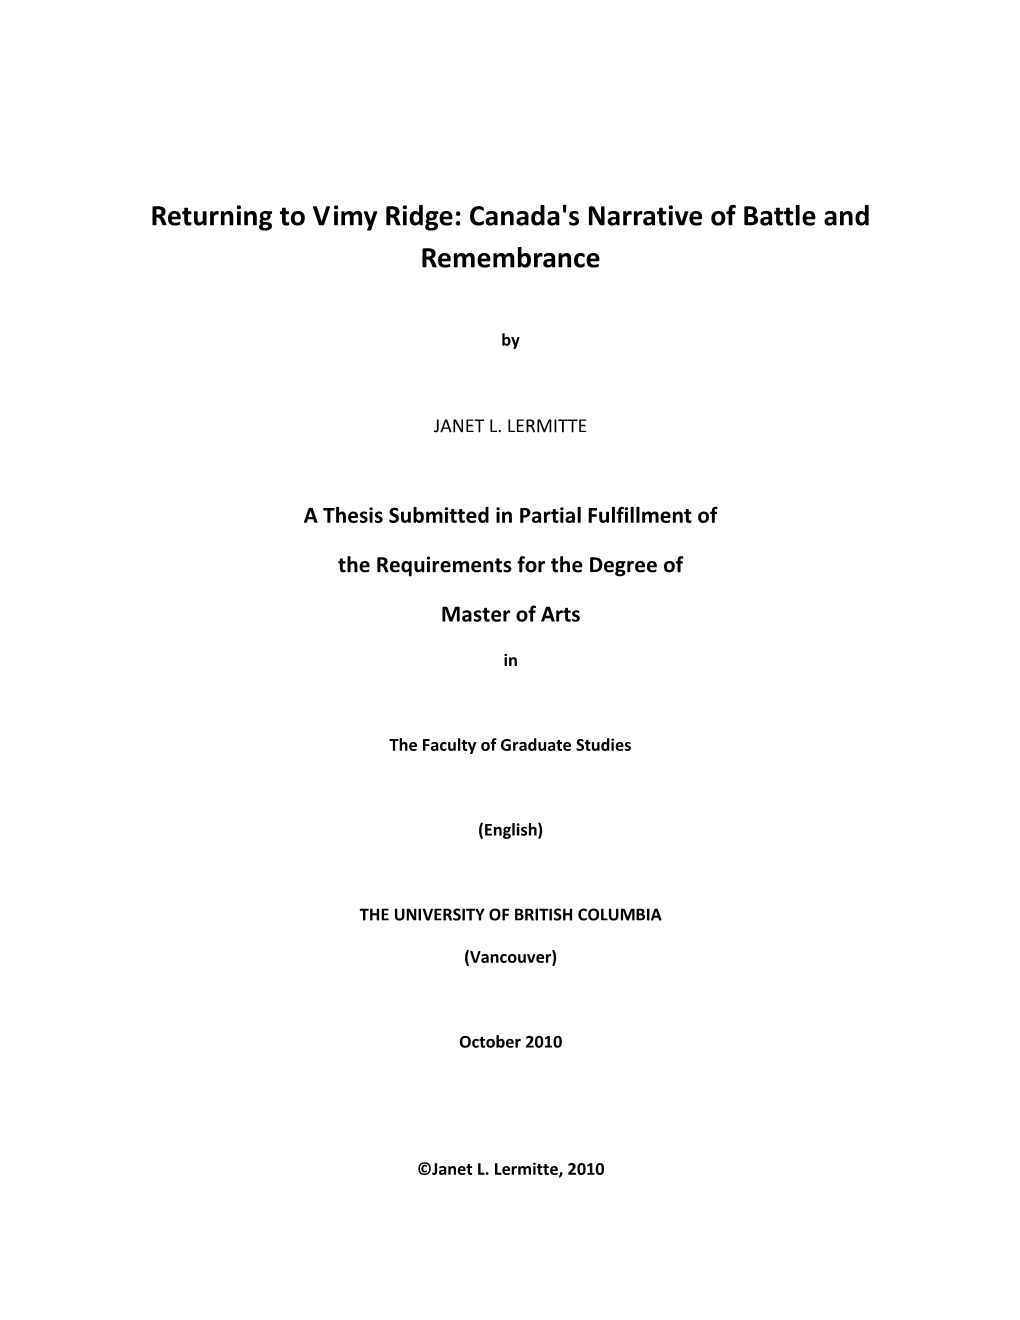 Returning to Vimy Ridge: Canada's Narrative of Battle and Remembrance